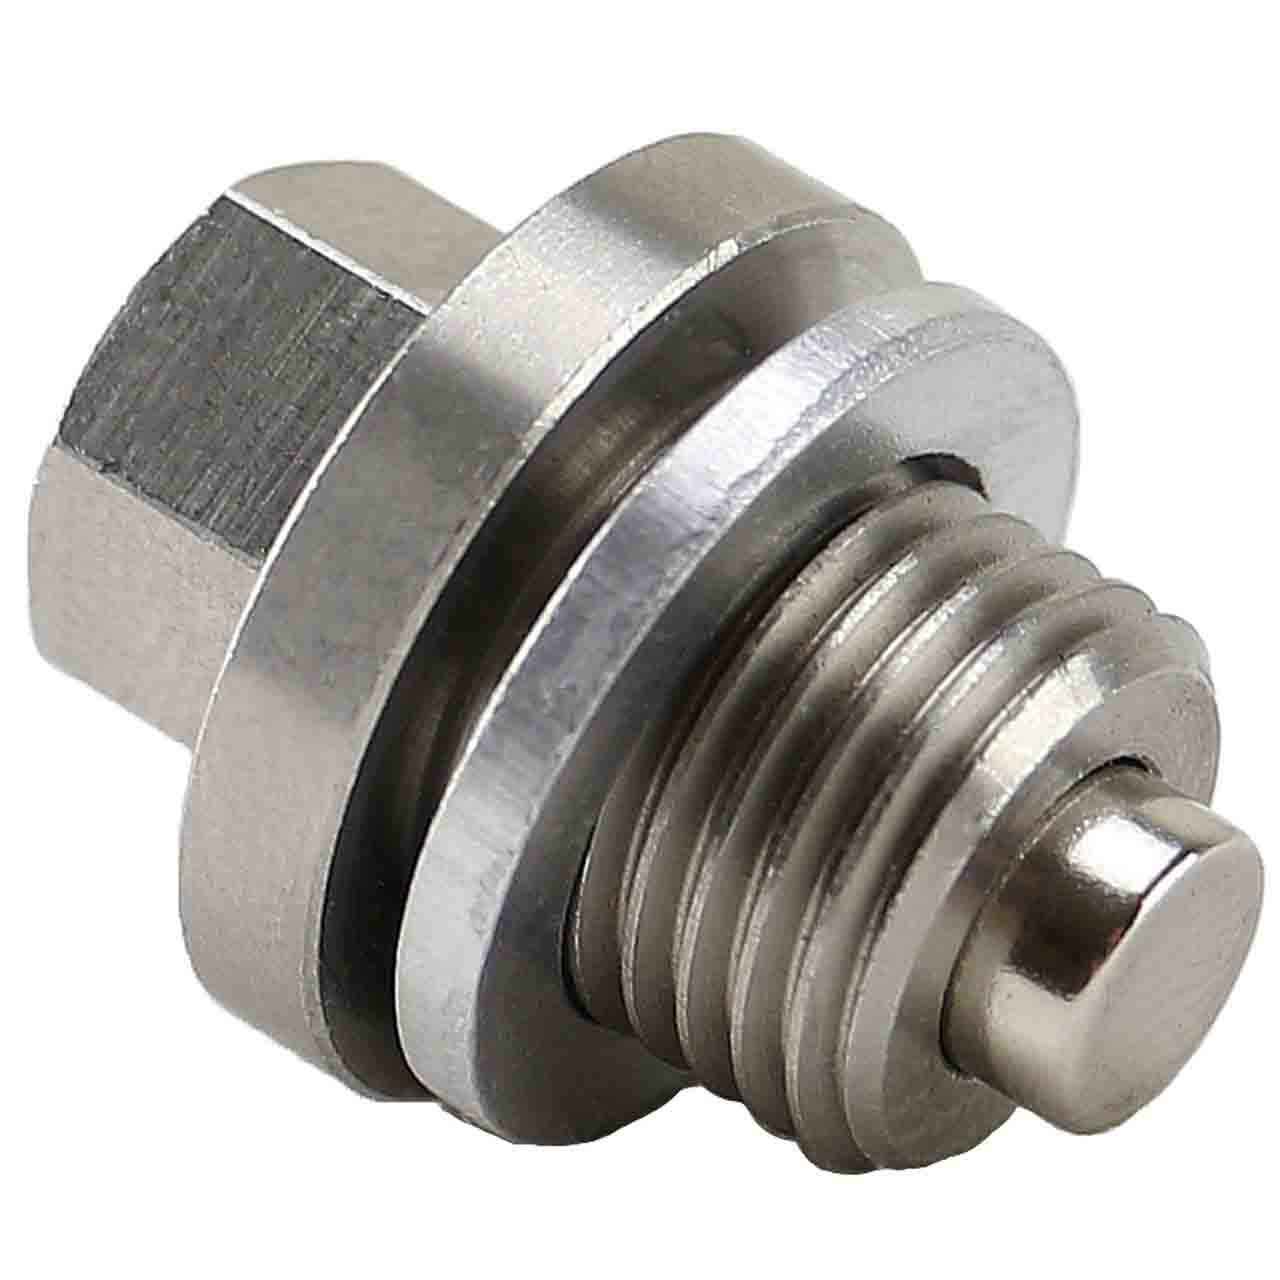 01500-1216B for Suzuki Motorcycle  - Stainless Steel Magnetic Oil Drain Plug with Neodymium Magnet - Made In USA